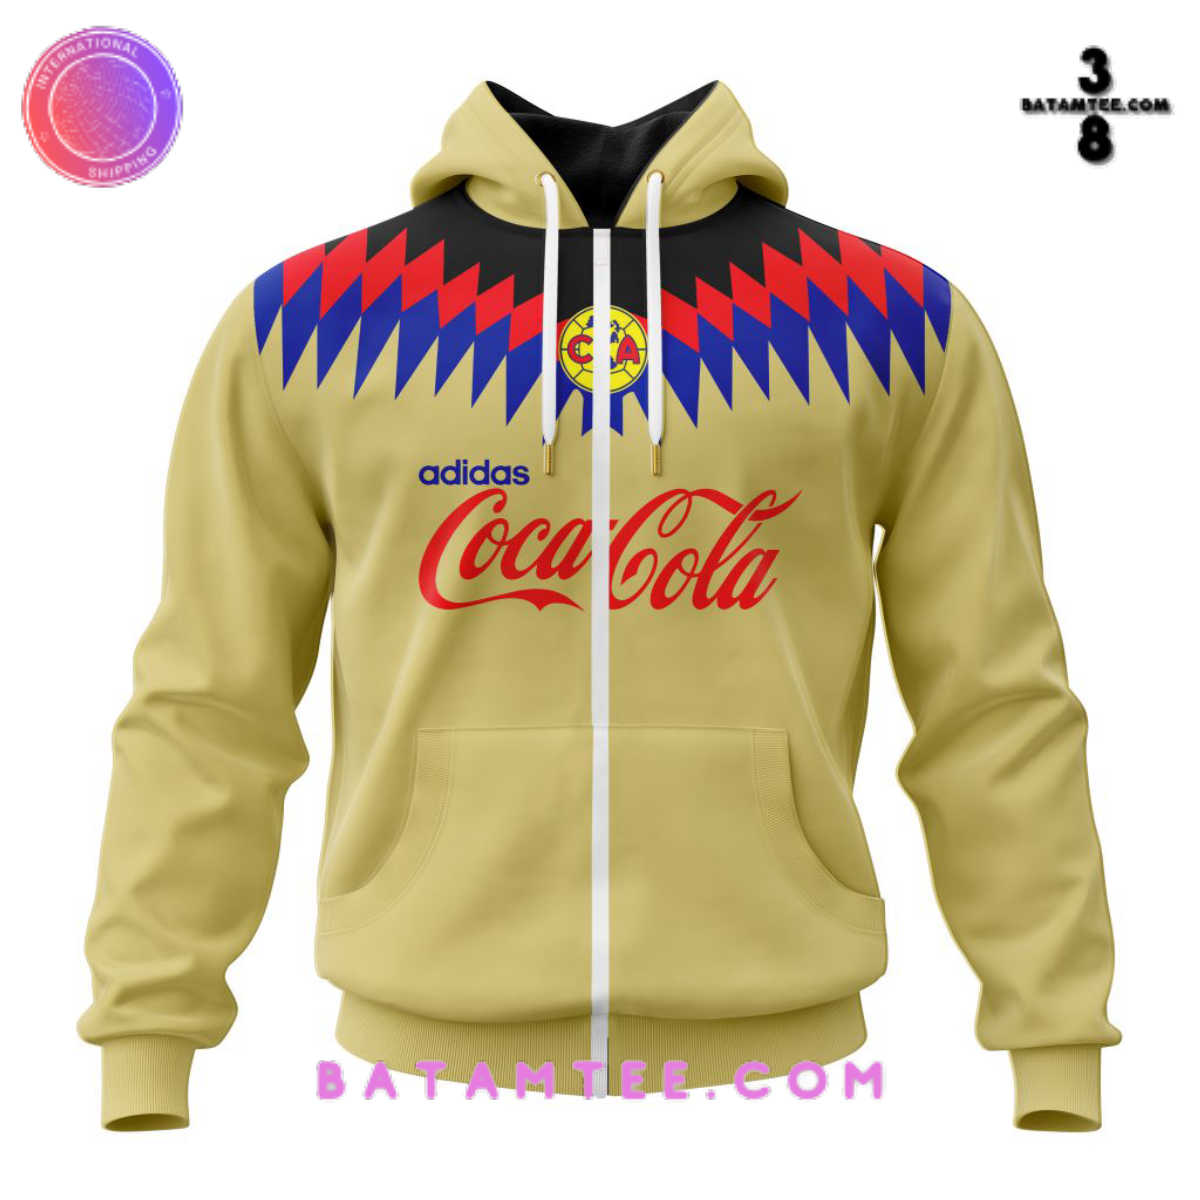 LIGA MX Club America Retro 1994 1996 Home Kits Personalized Hoodie's Overview - Batamtee Shop - Threads & Totes: Your Style Destination